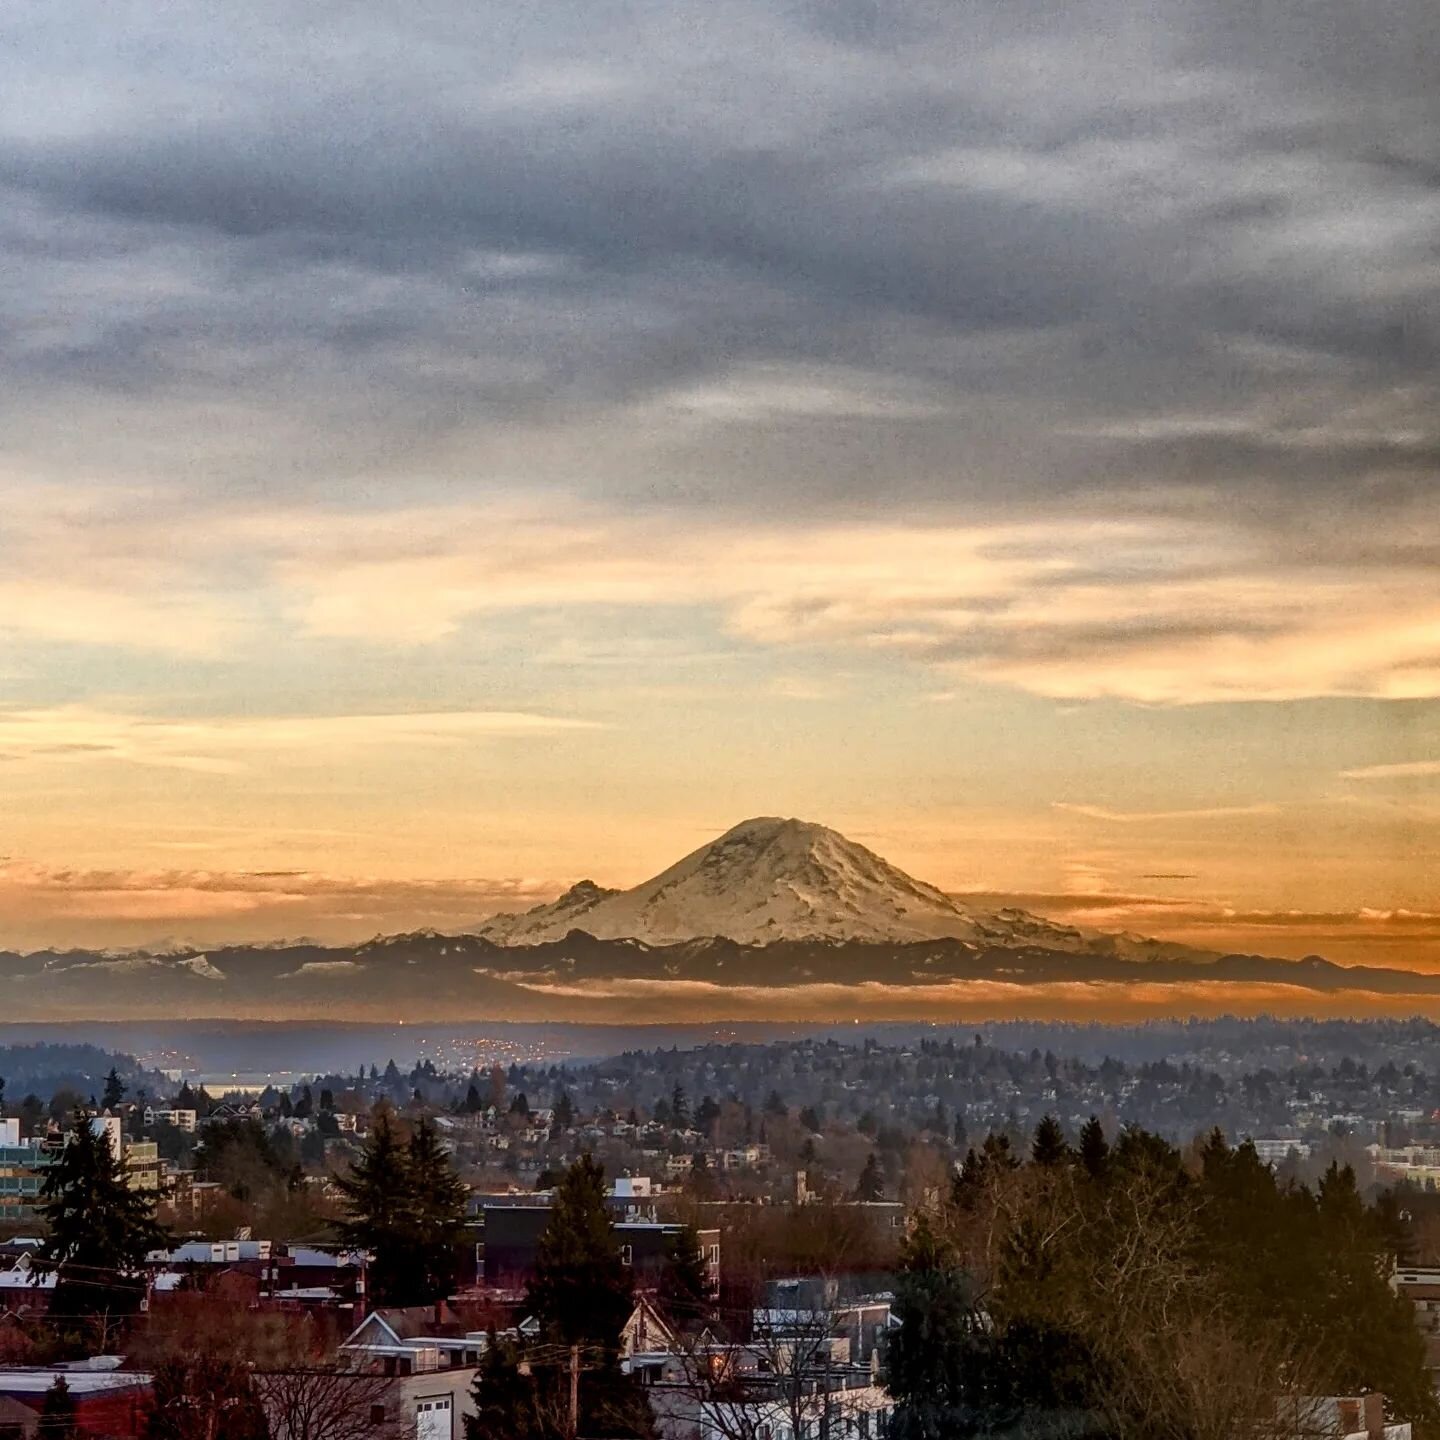 The views in Seattle still amaze me, even after 20+ years.  Mt. Rainier view from my doctor's office.  Wow!
#circlesaregood #seattle #mtrainier  #sunset #wow